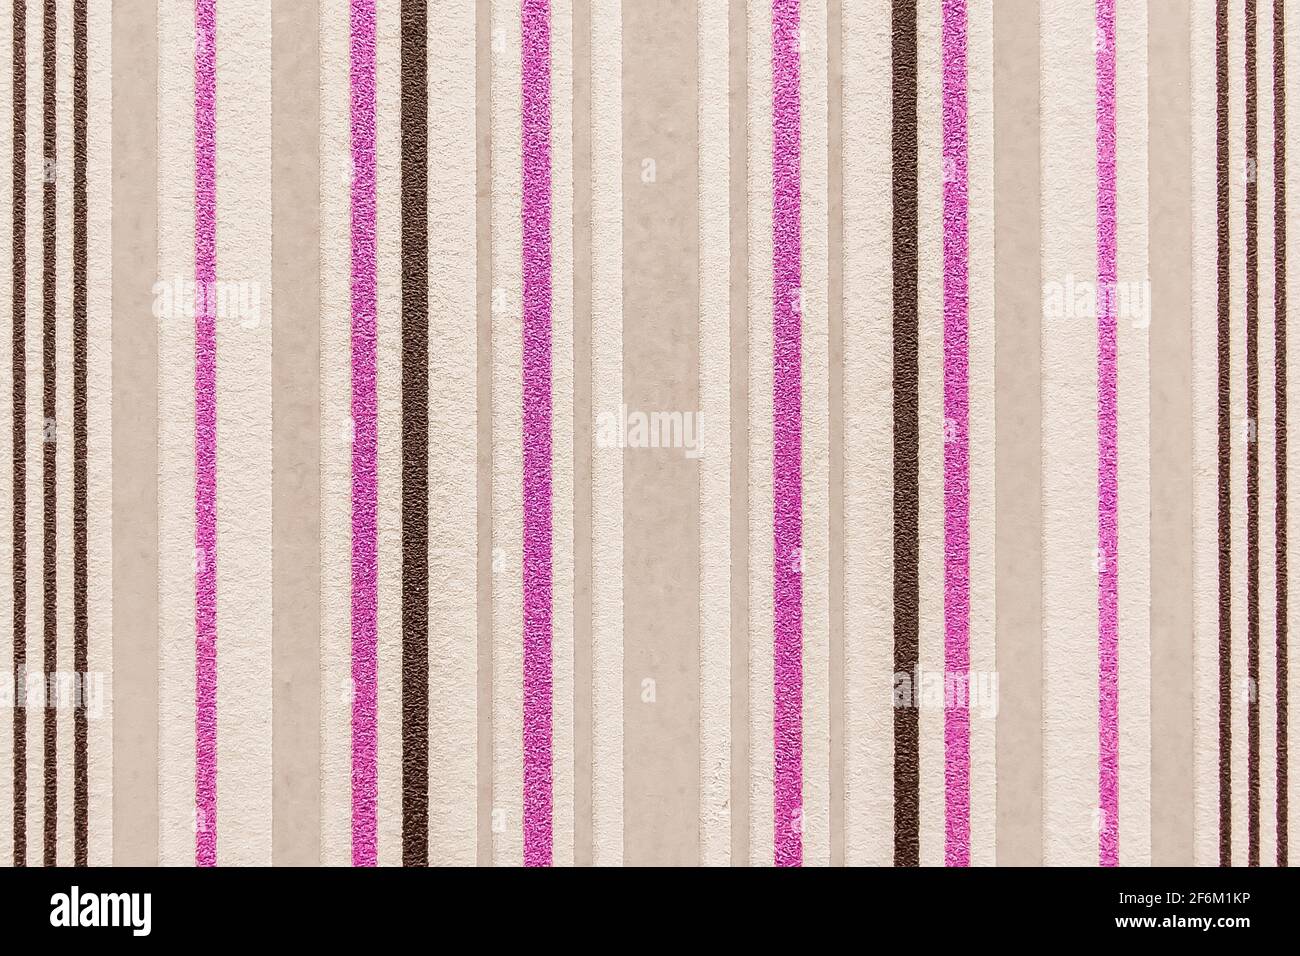 Seamless paper texture of decorative colored wallpapers with abstract vertical lines background. Stock Photo